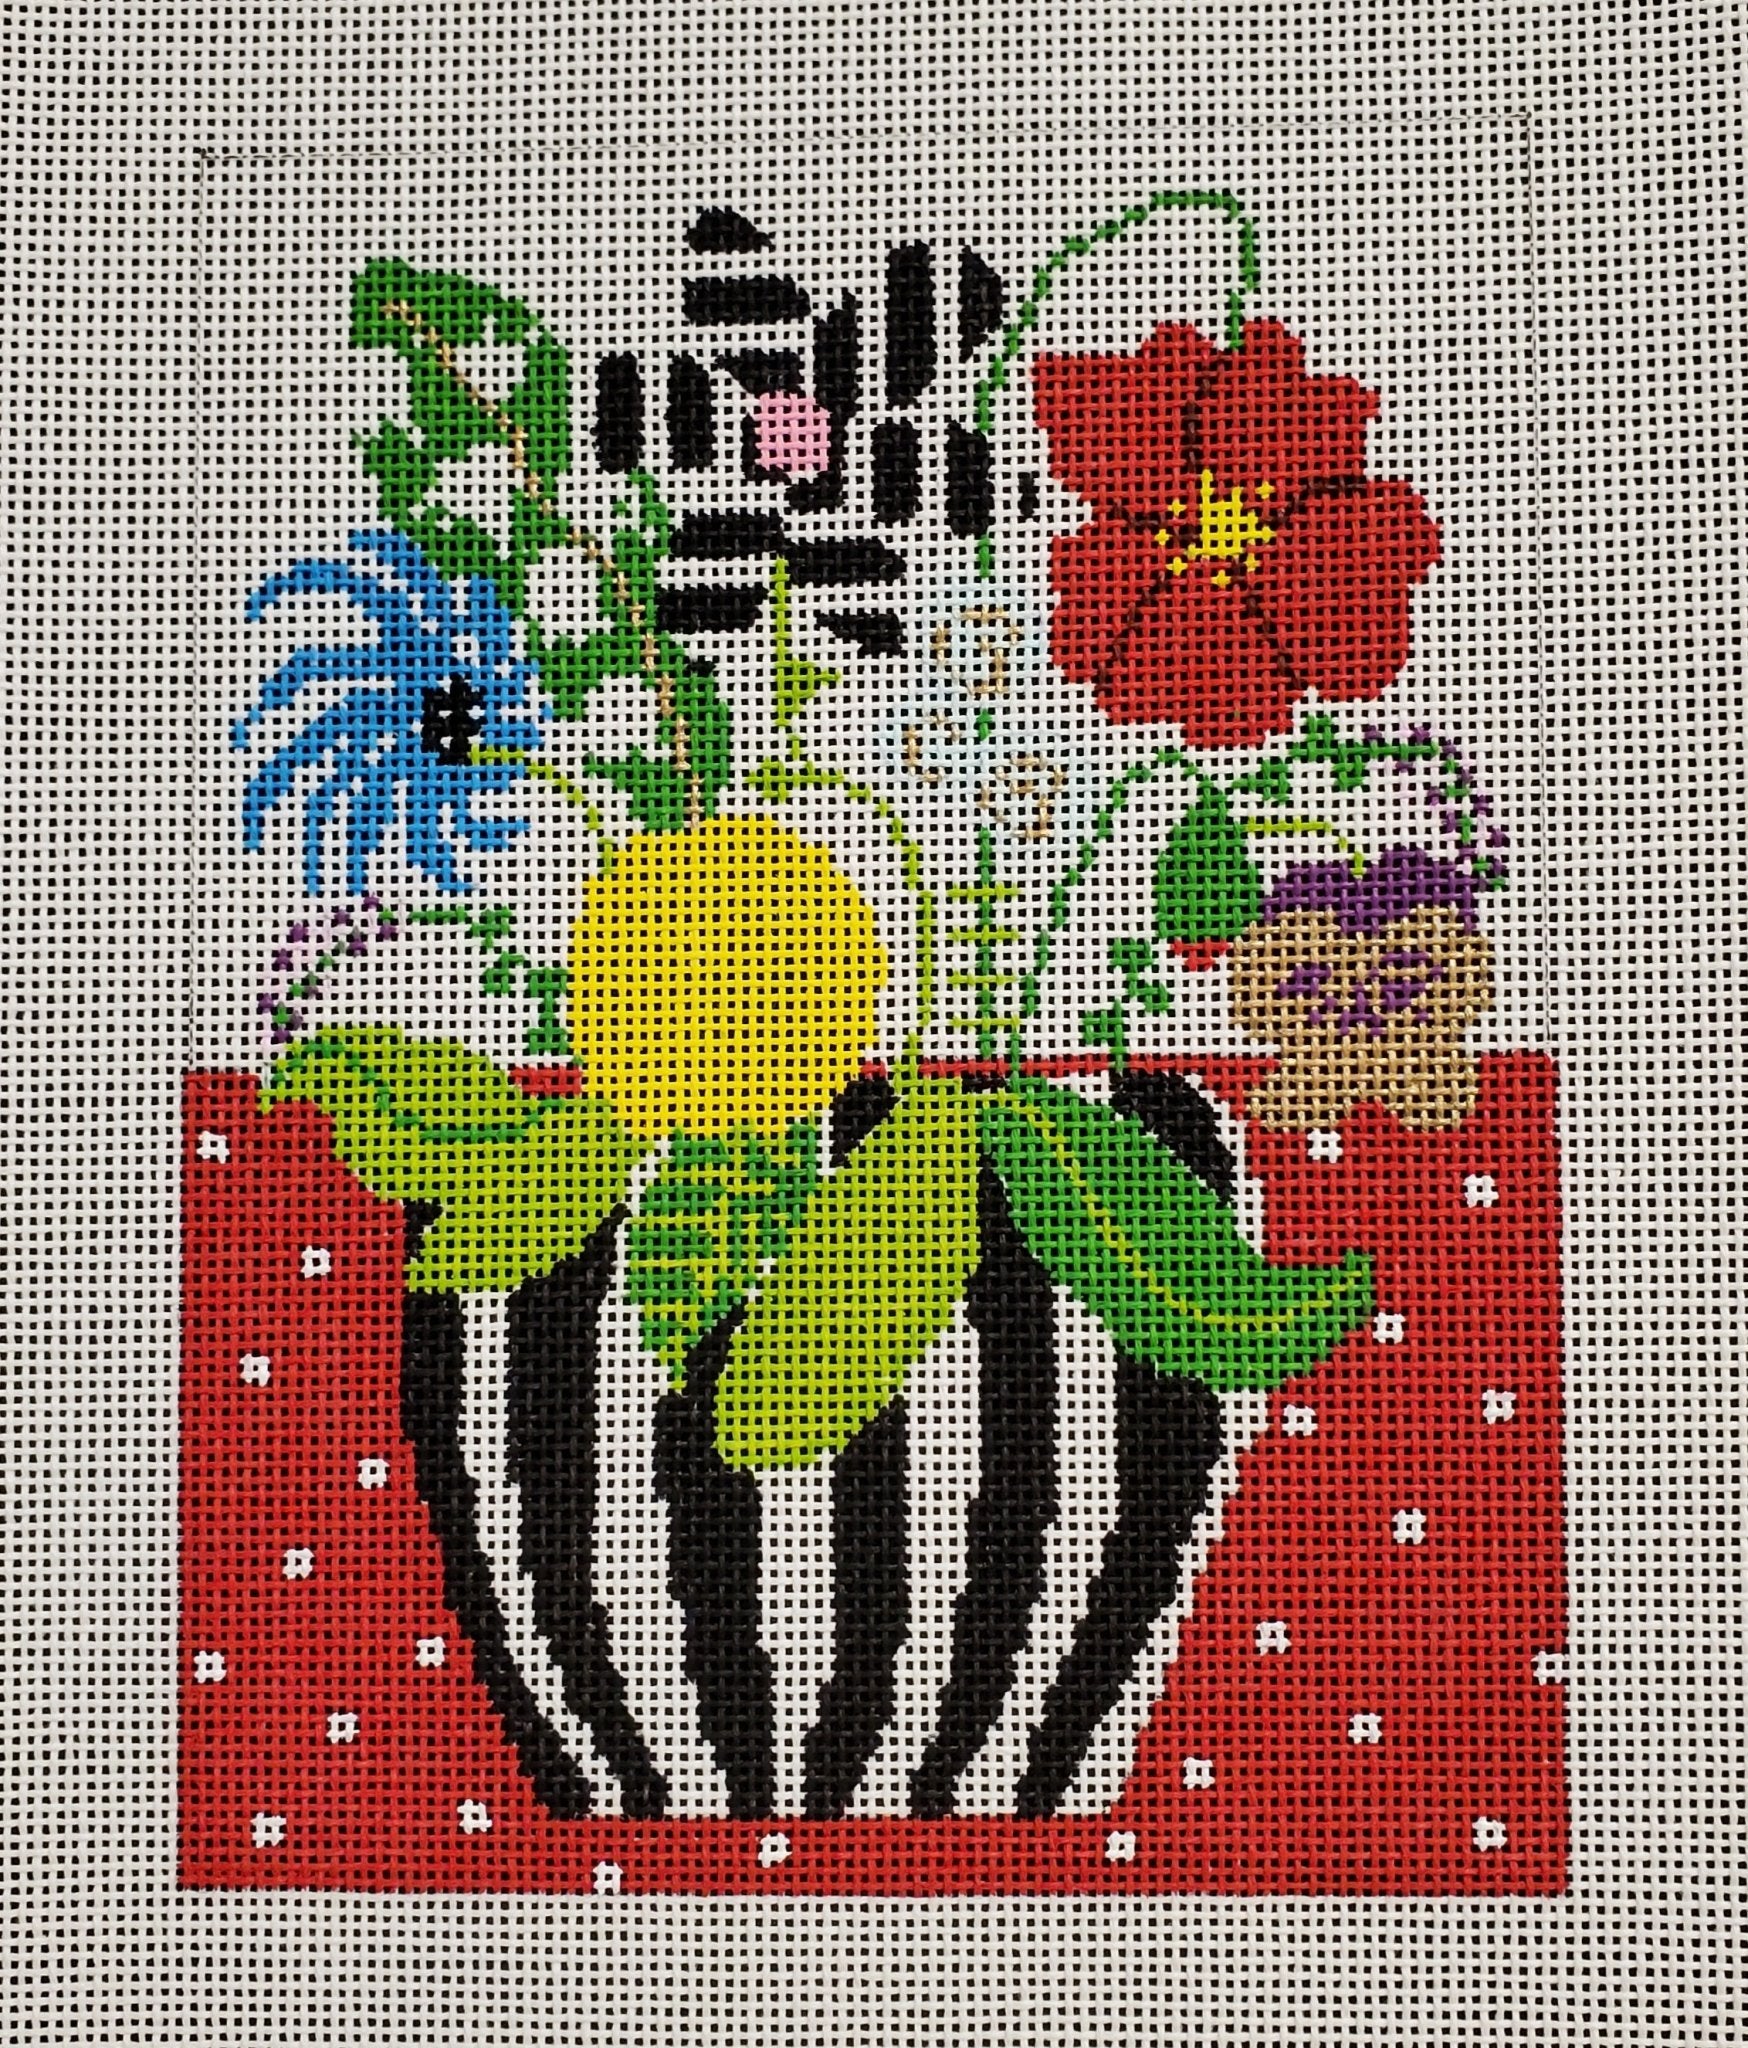 Frida's Flowers - Includes Stitch Guide - The Flying Needles